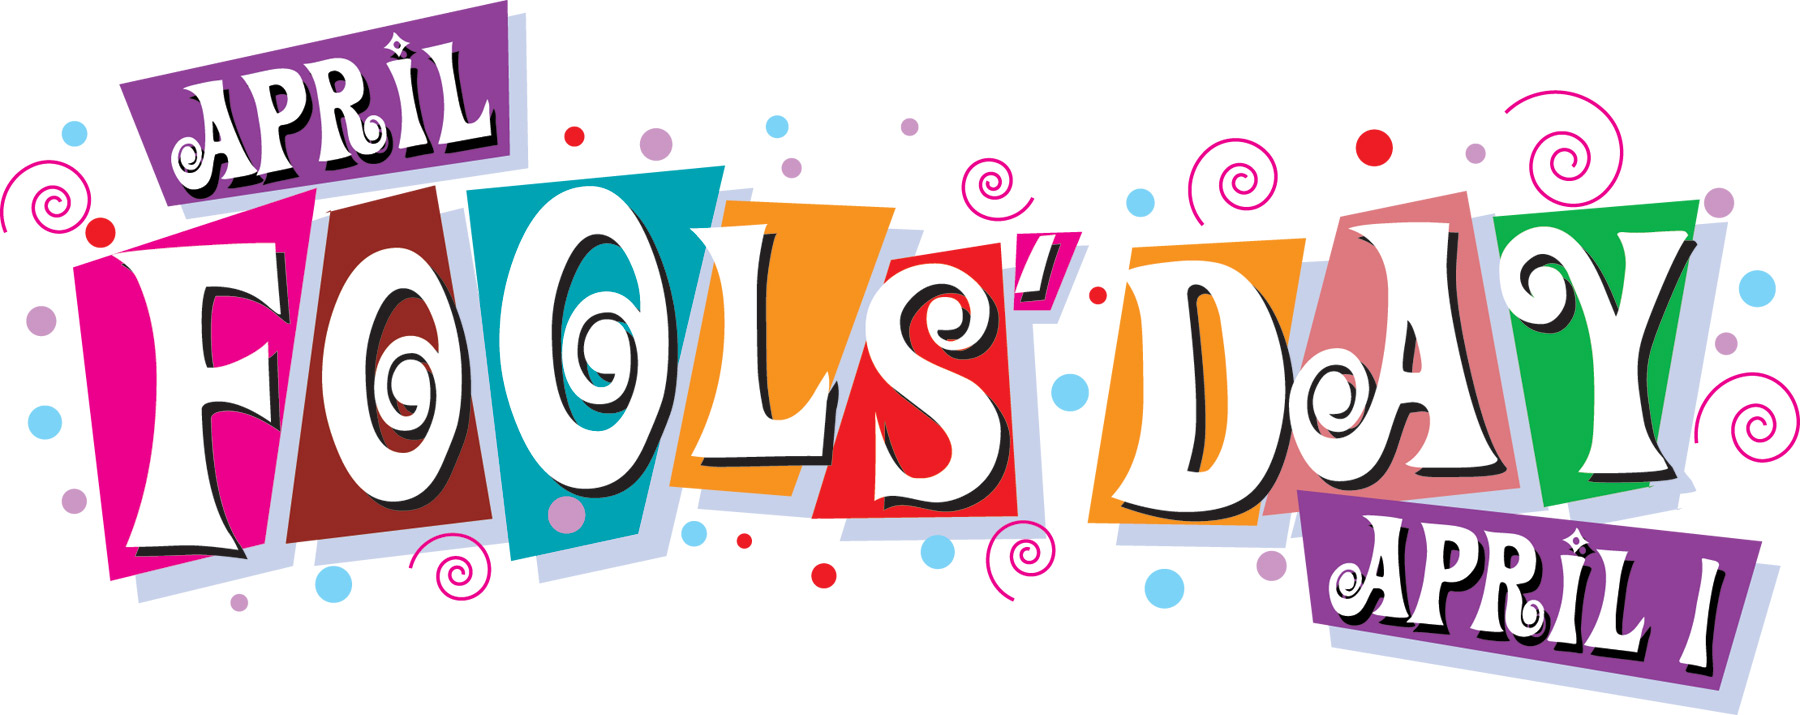 April Fool's Day 2014 Clipart Photos and Images | Happy Holidays 2014